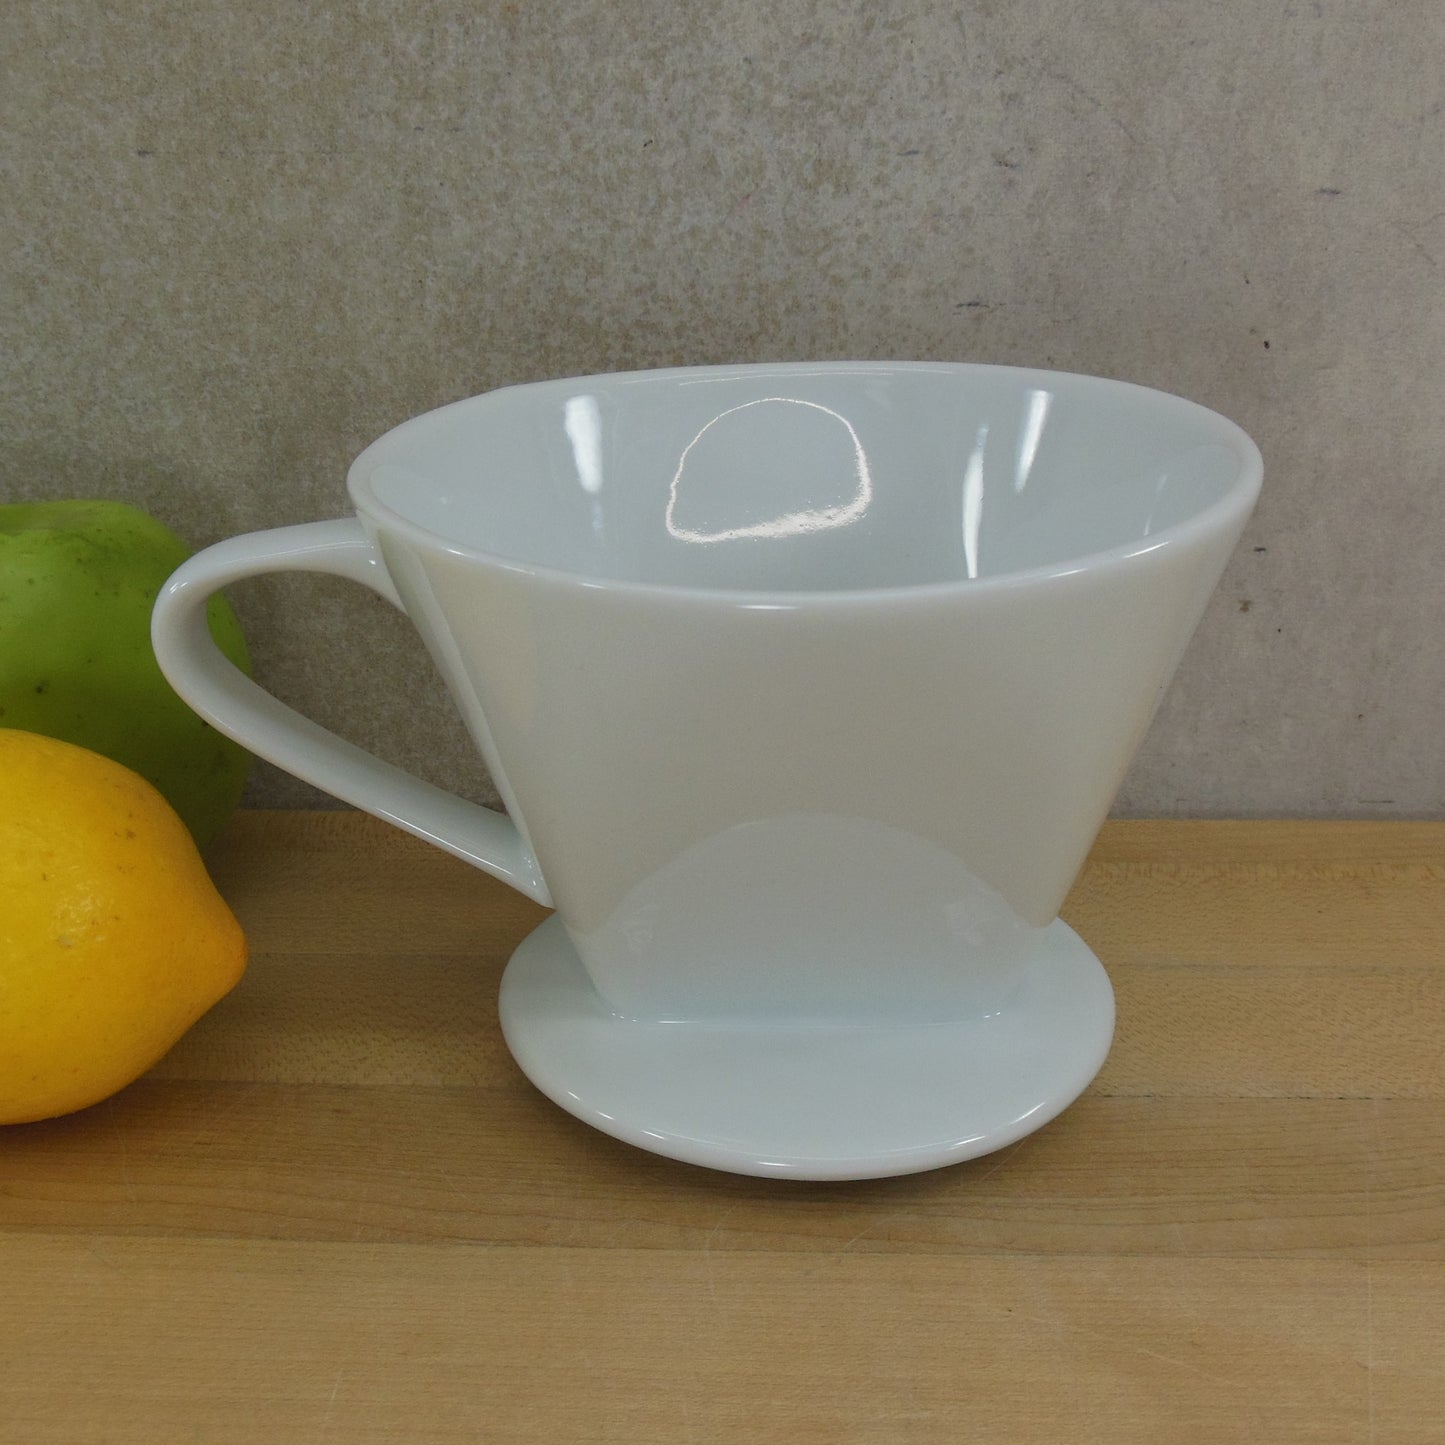 Unbranded White Porcelain Pour Over Coffee Maker Cone